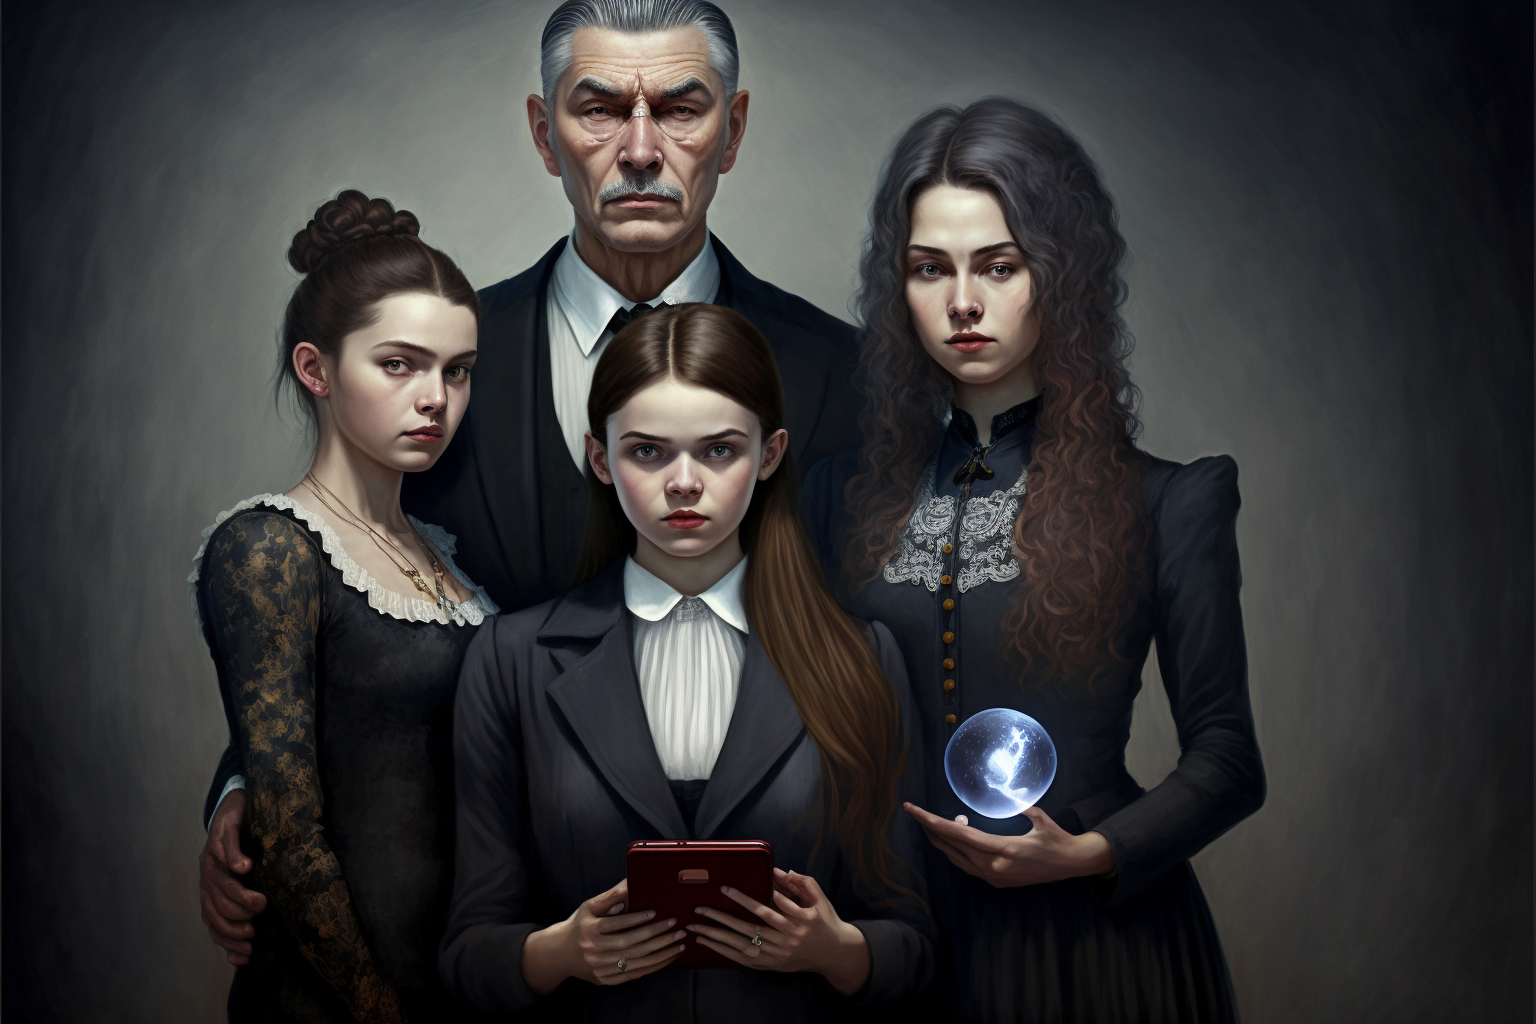 family portrait with a stern father in a 3-piece suit wearing a cross, his middle-aged wife a witch holding a dictionary, a teen daughter with a smartphone and a crystal ball